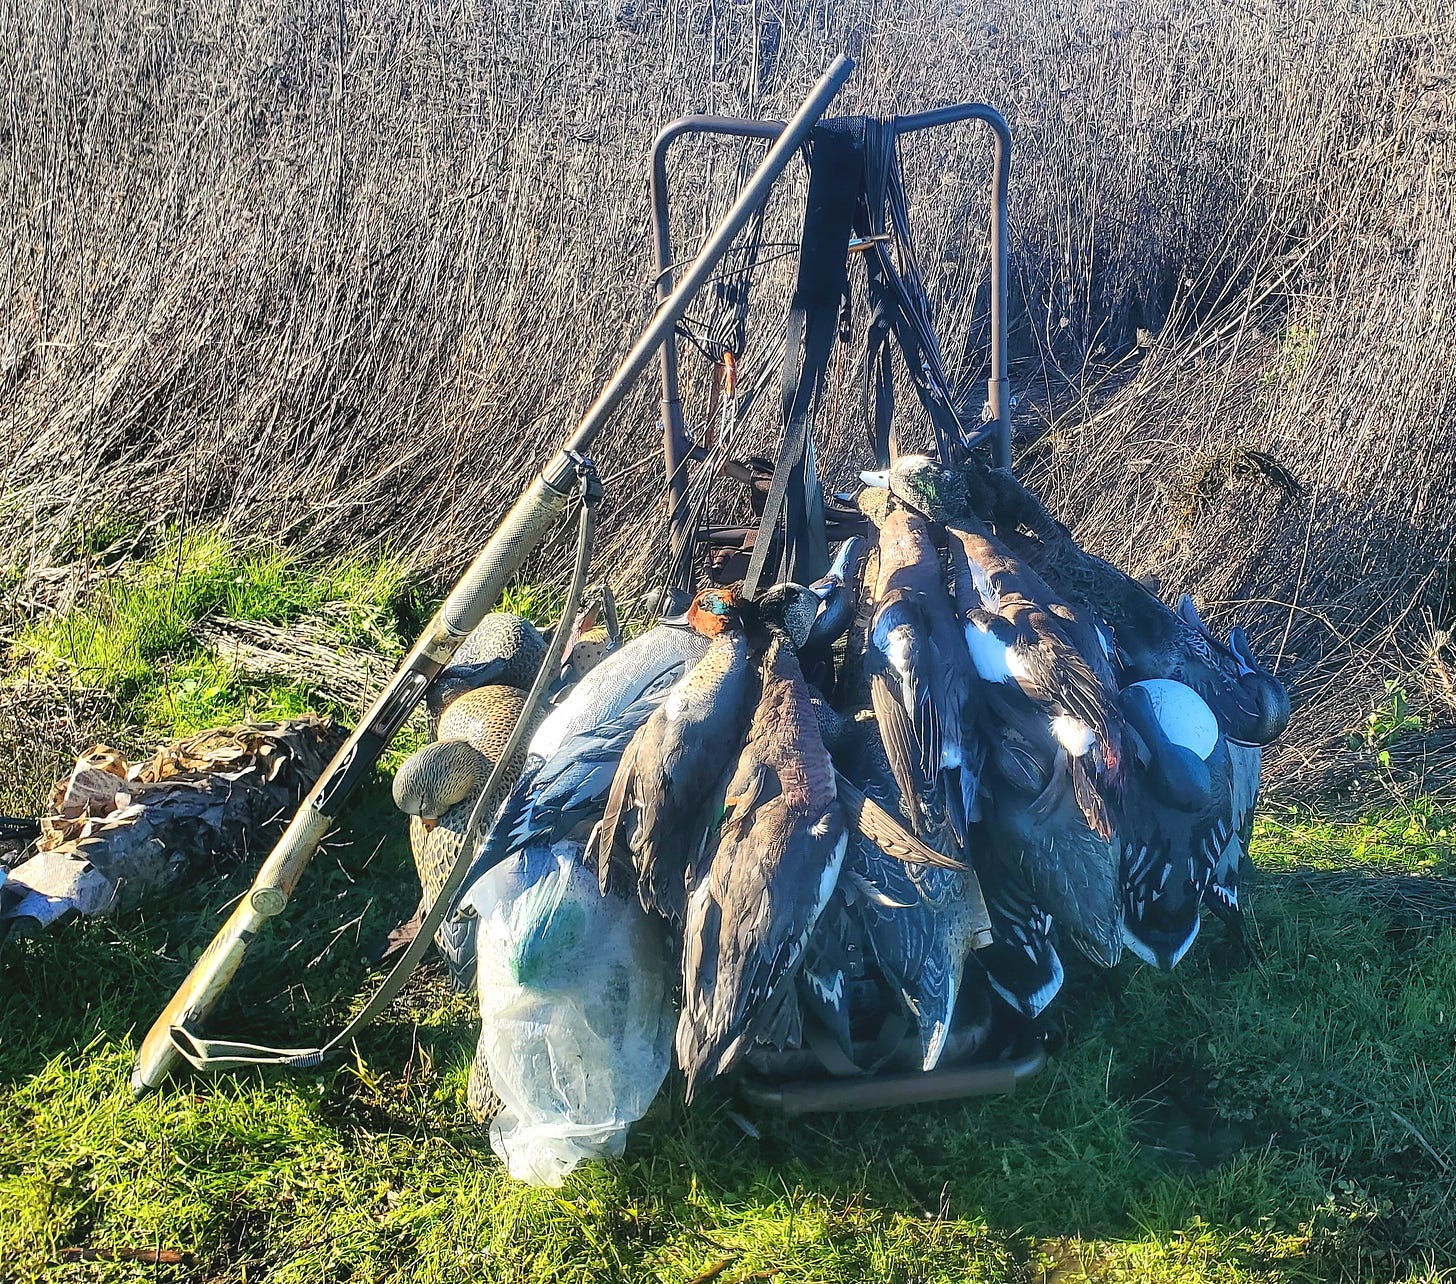 Pack frame loaded with decoys and ducks